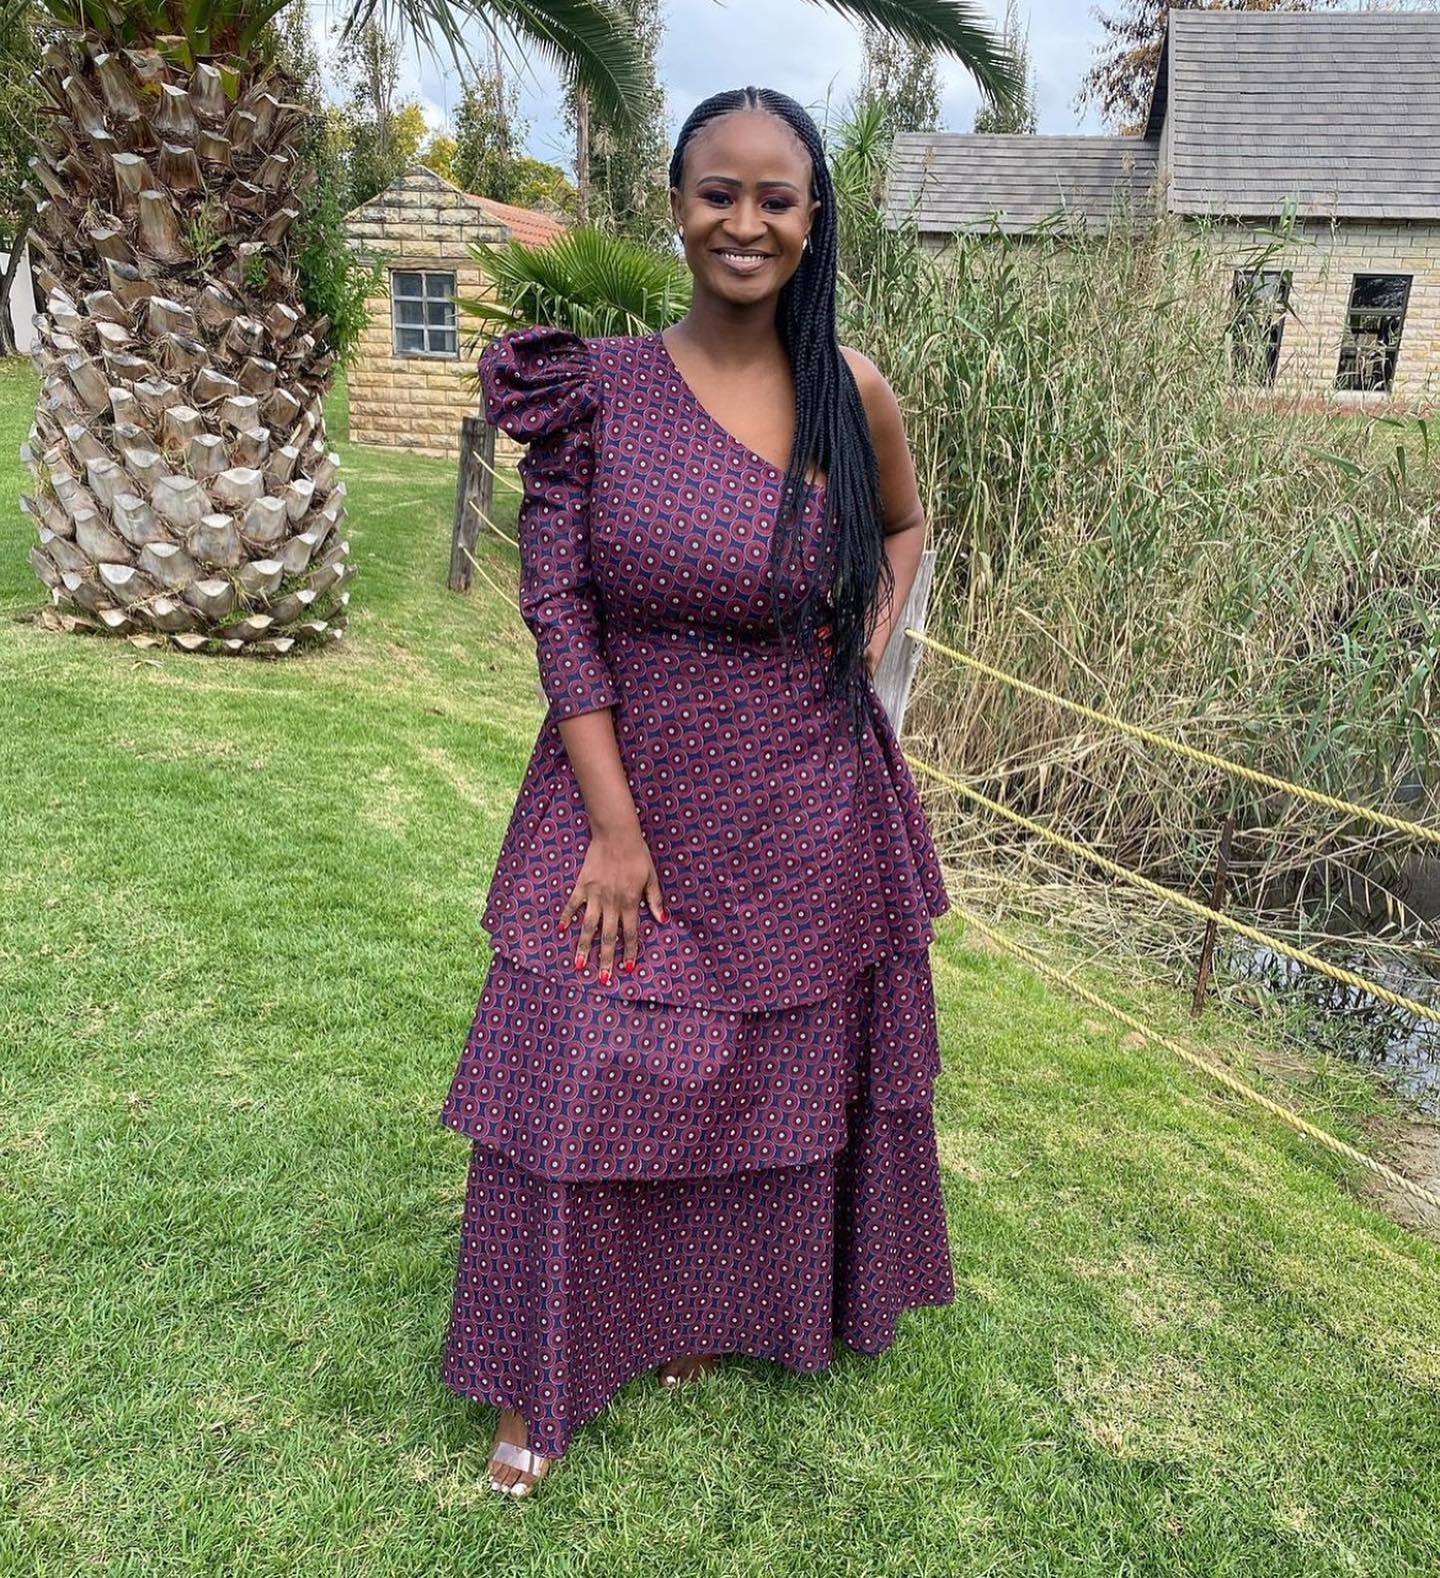 Tswana Traditional Dresses: Exploring the Artistic Techniques and Materials Used 17